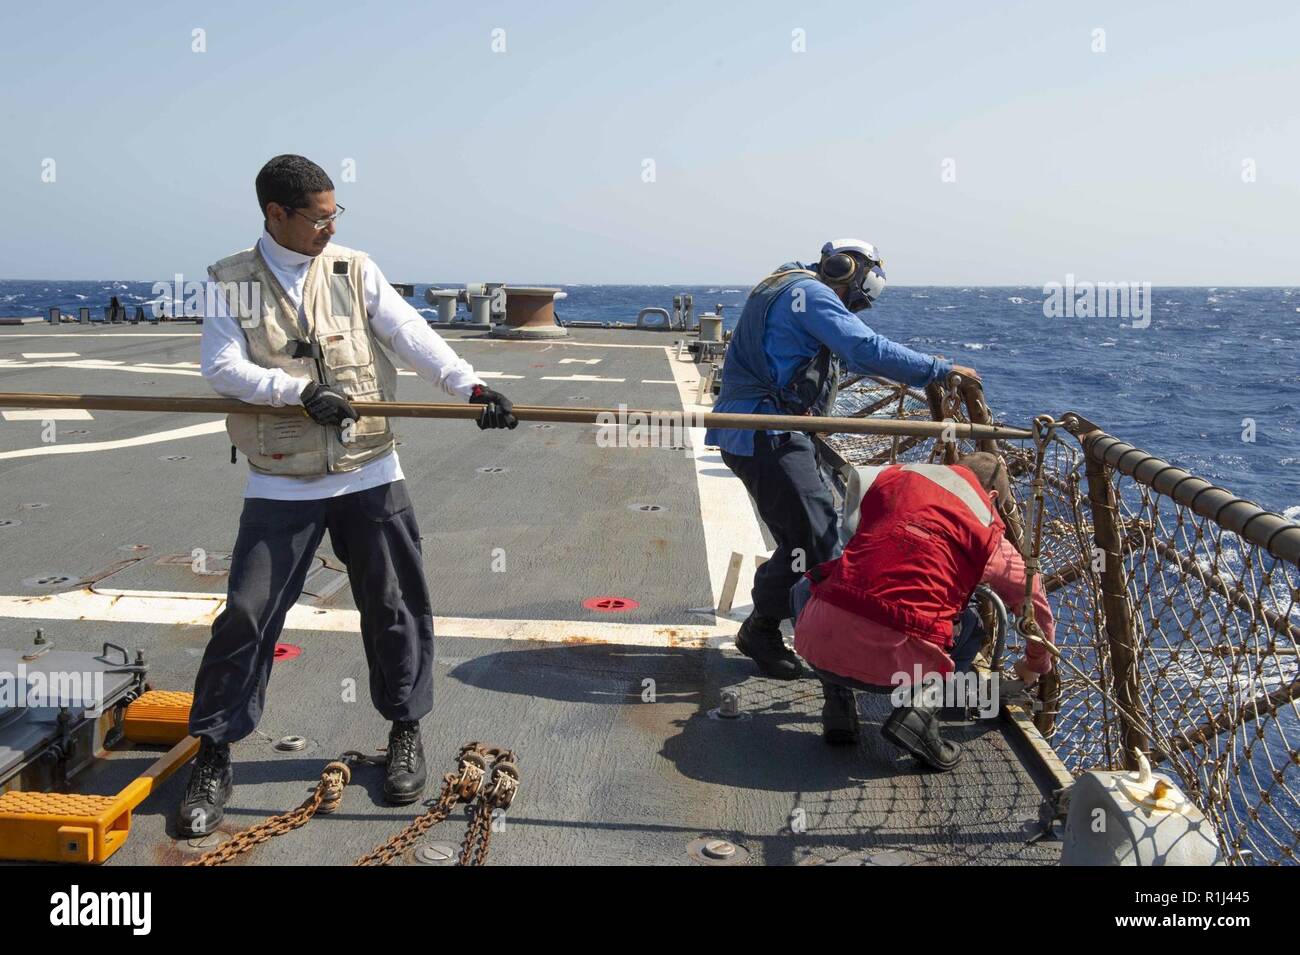 MEDITERRANEAN SEA (Sept. 26, 2018) Sailors lower safety deck nets on the flight deck before the start of flight operations aboard the Arleigh Burke-class guided-missile destroyer USS Arleigh Burke (DDG 51) in the Mediterranean Sea Sept. 26, 2018. Arleigh Burke, homeported at Naval Station Norfolk, is conducting naval operations in the U.S. 6th Fleet area of operations in support of U.S. national security interests in Europe and Africa. Stock Photo